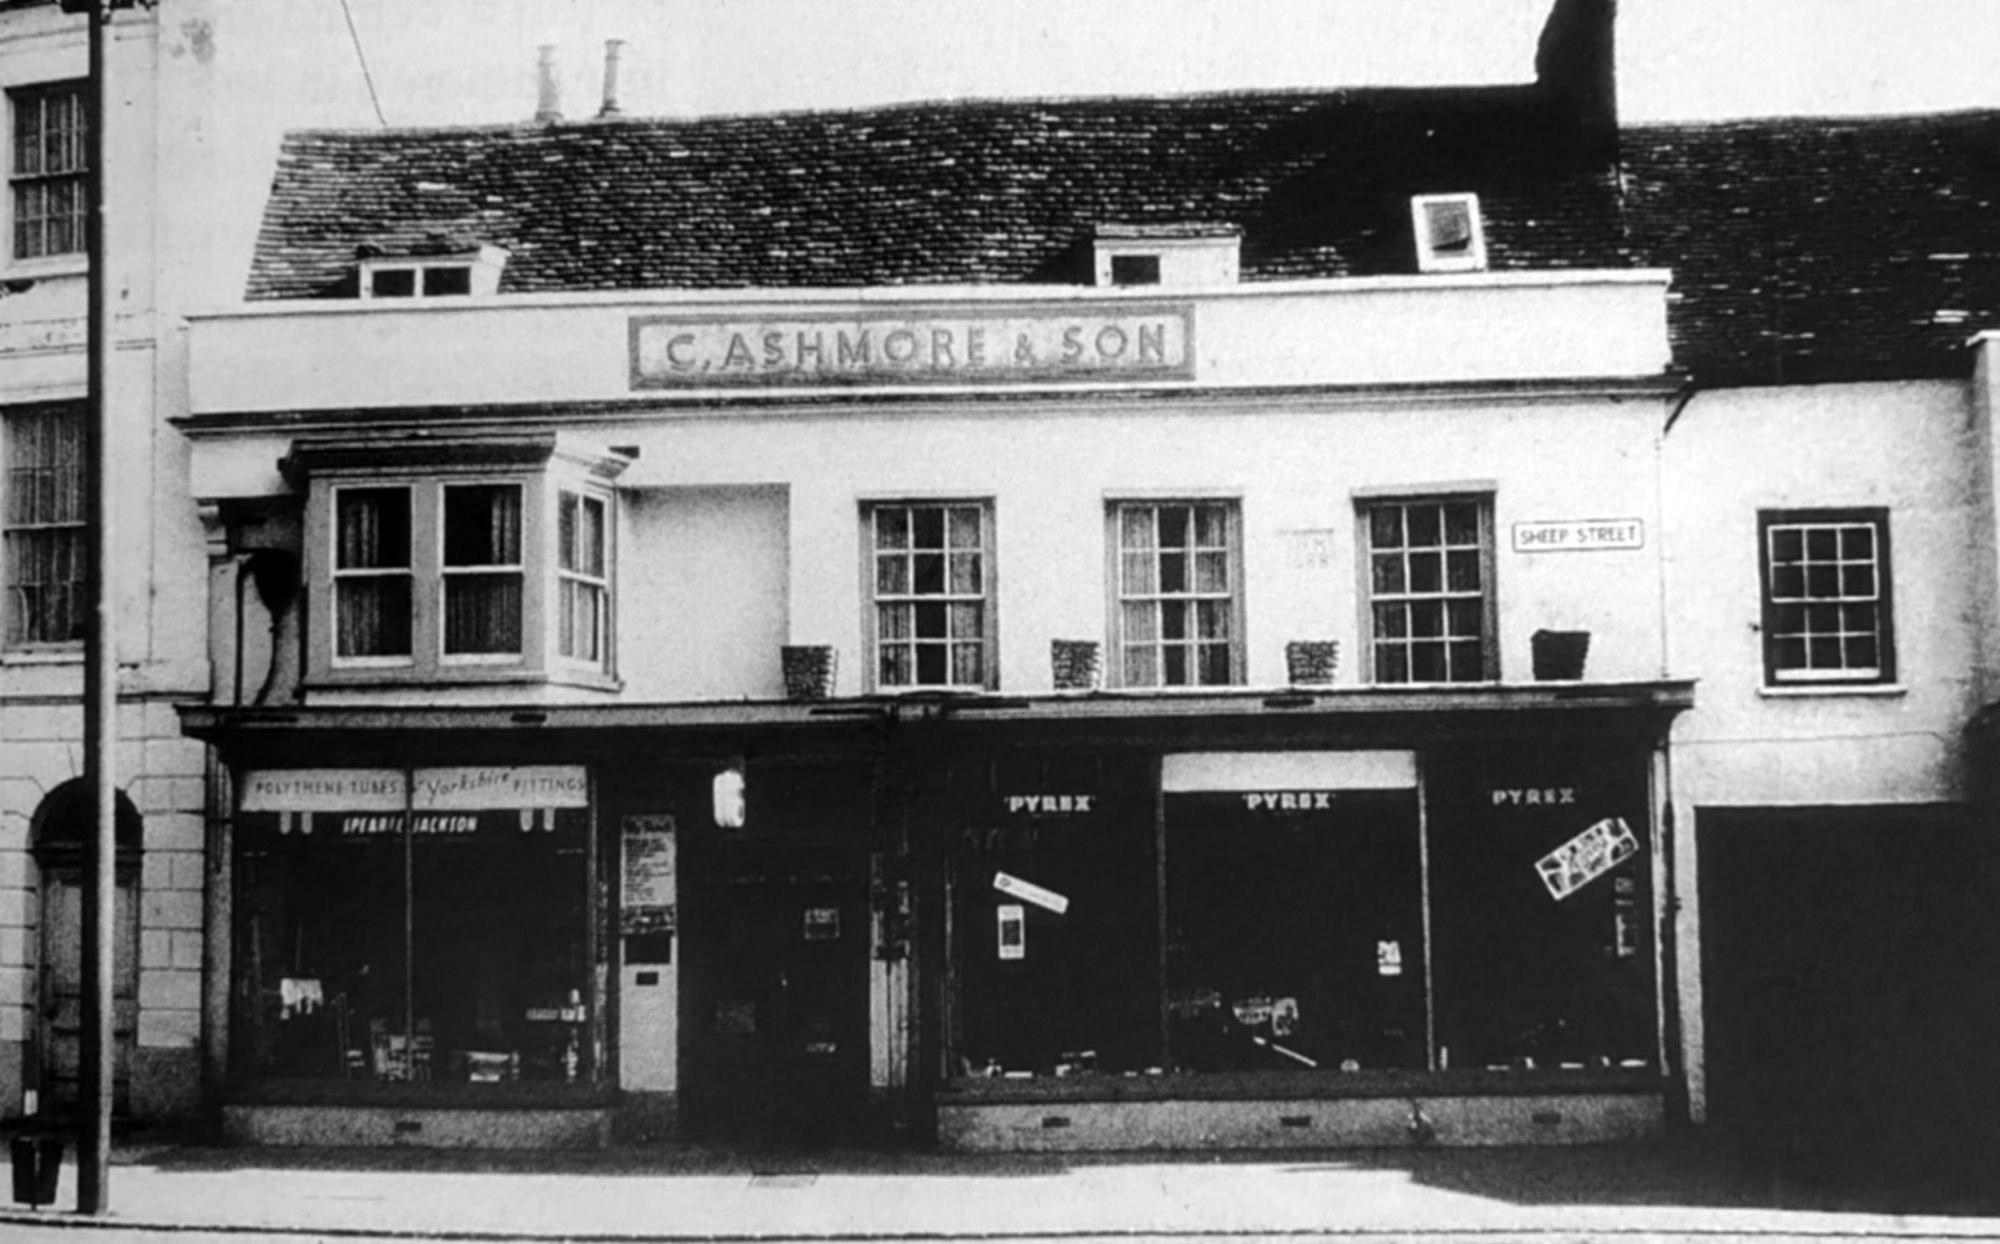 The shop front in 1967.